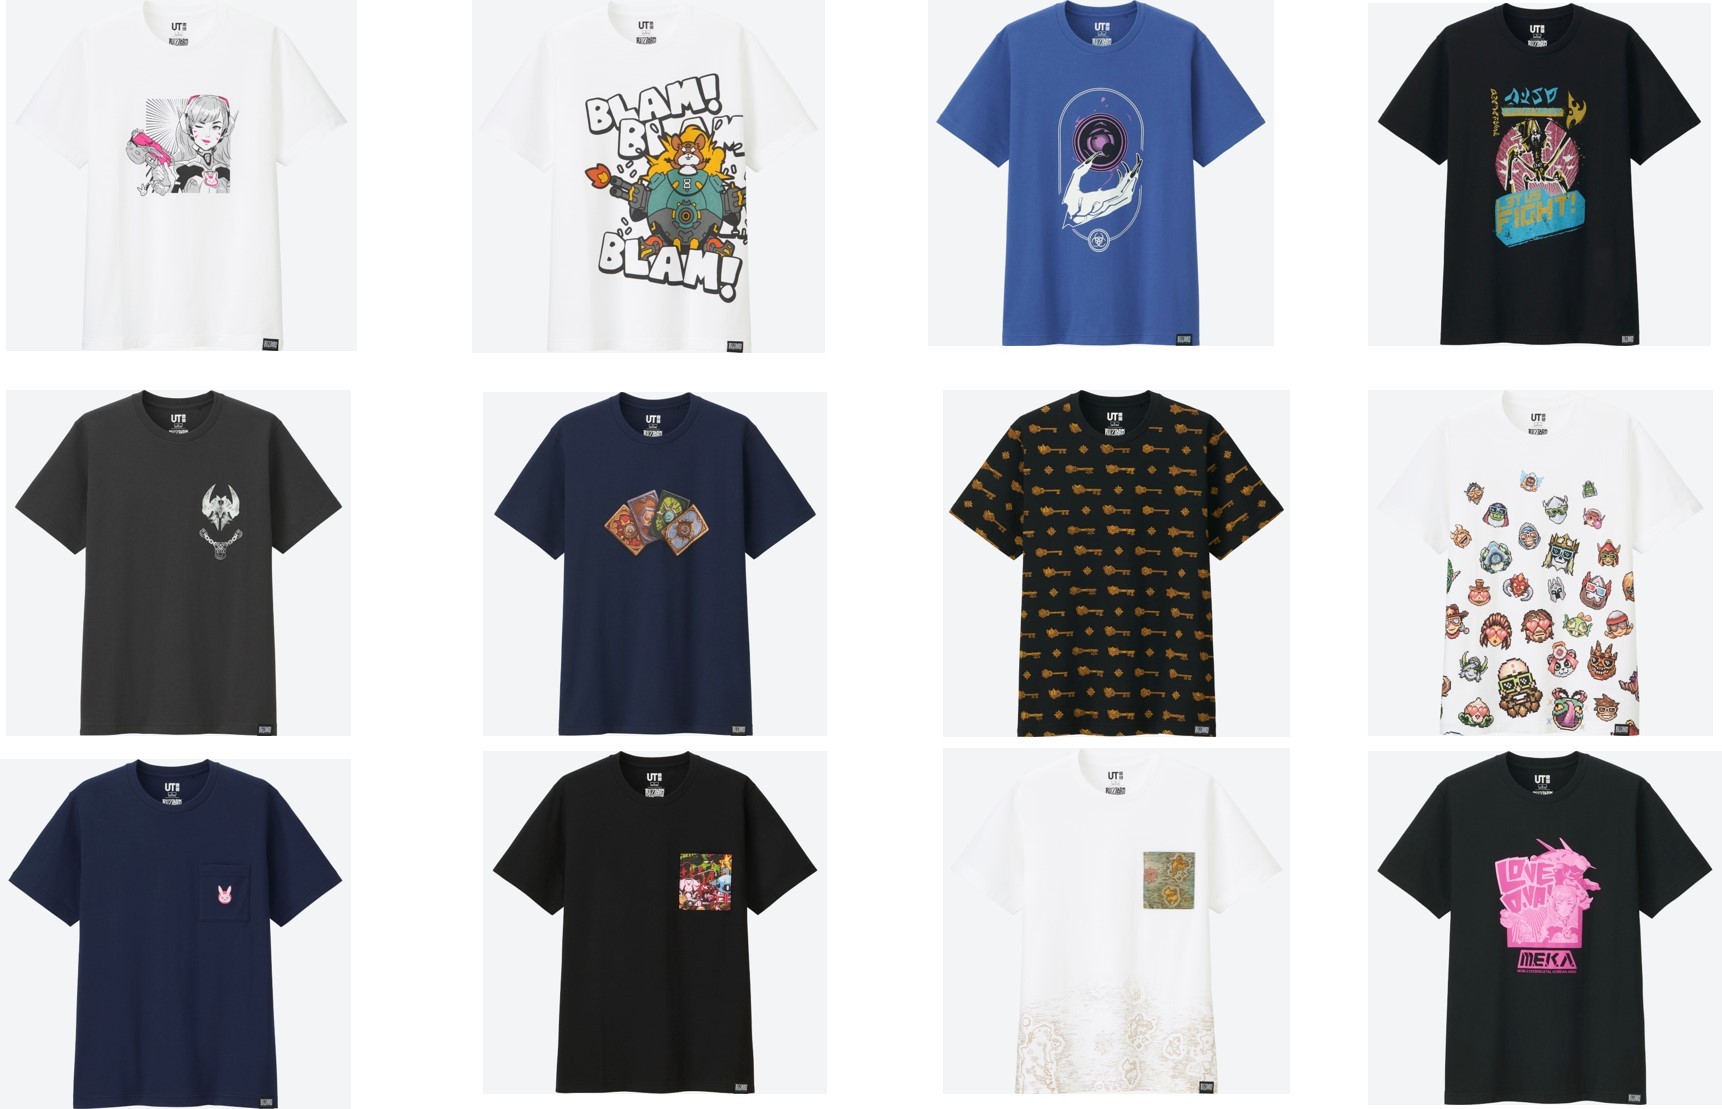 Uniqlo Ut Line Of Blizzard T Shirts Launches Today